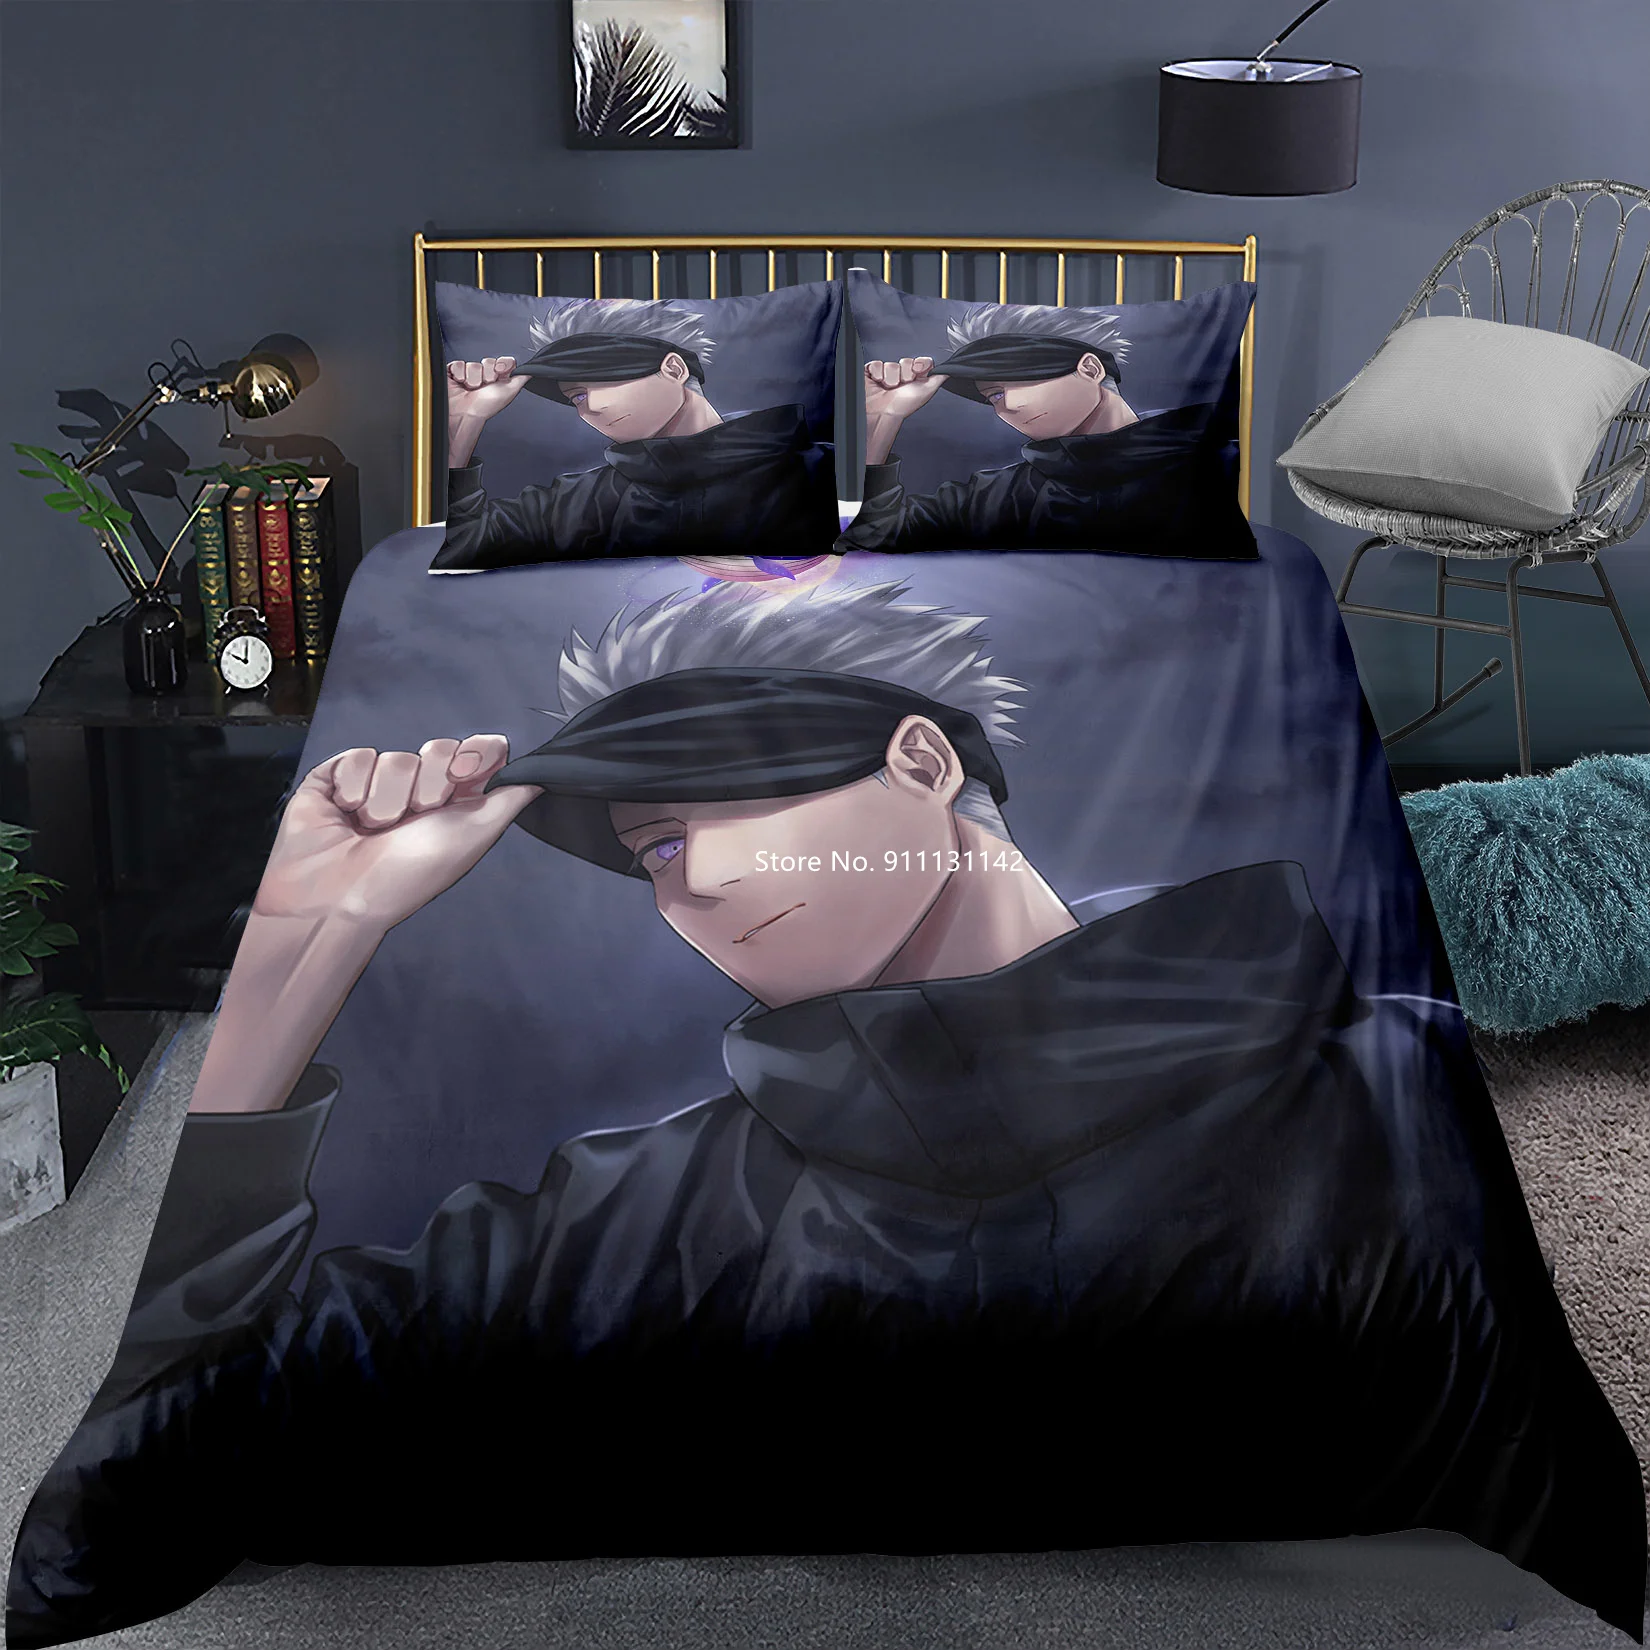 

Fashion Best-selling Japanese Anime Jinx Printing Bedding Set Children Bedroom Decoration Cartoon Bed Cover Pillowcase